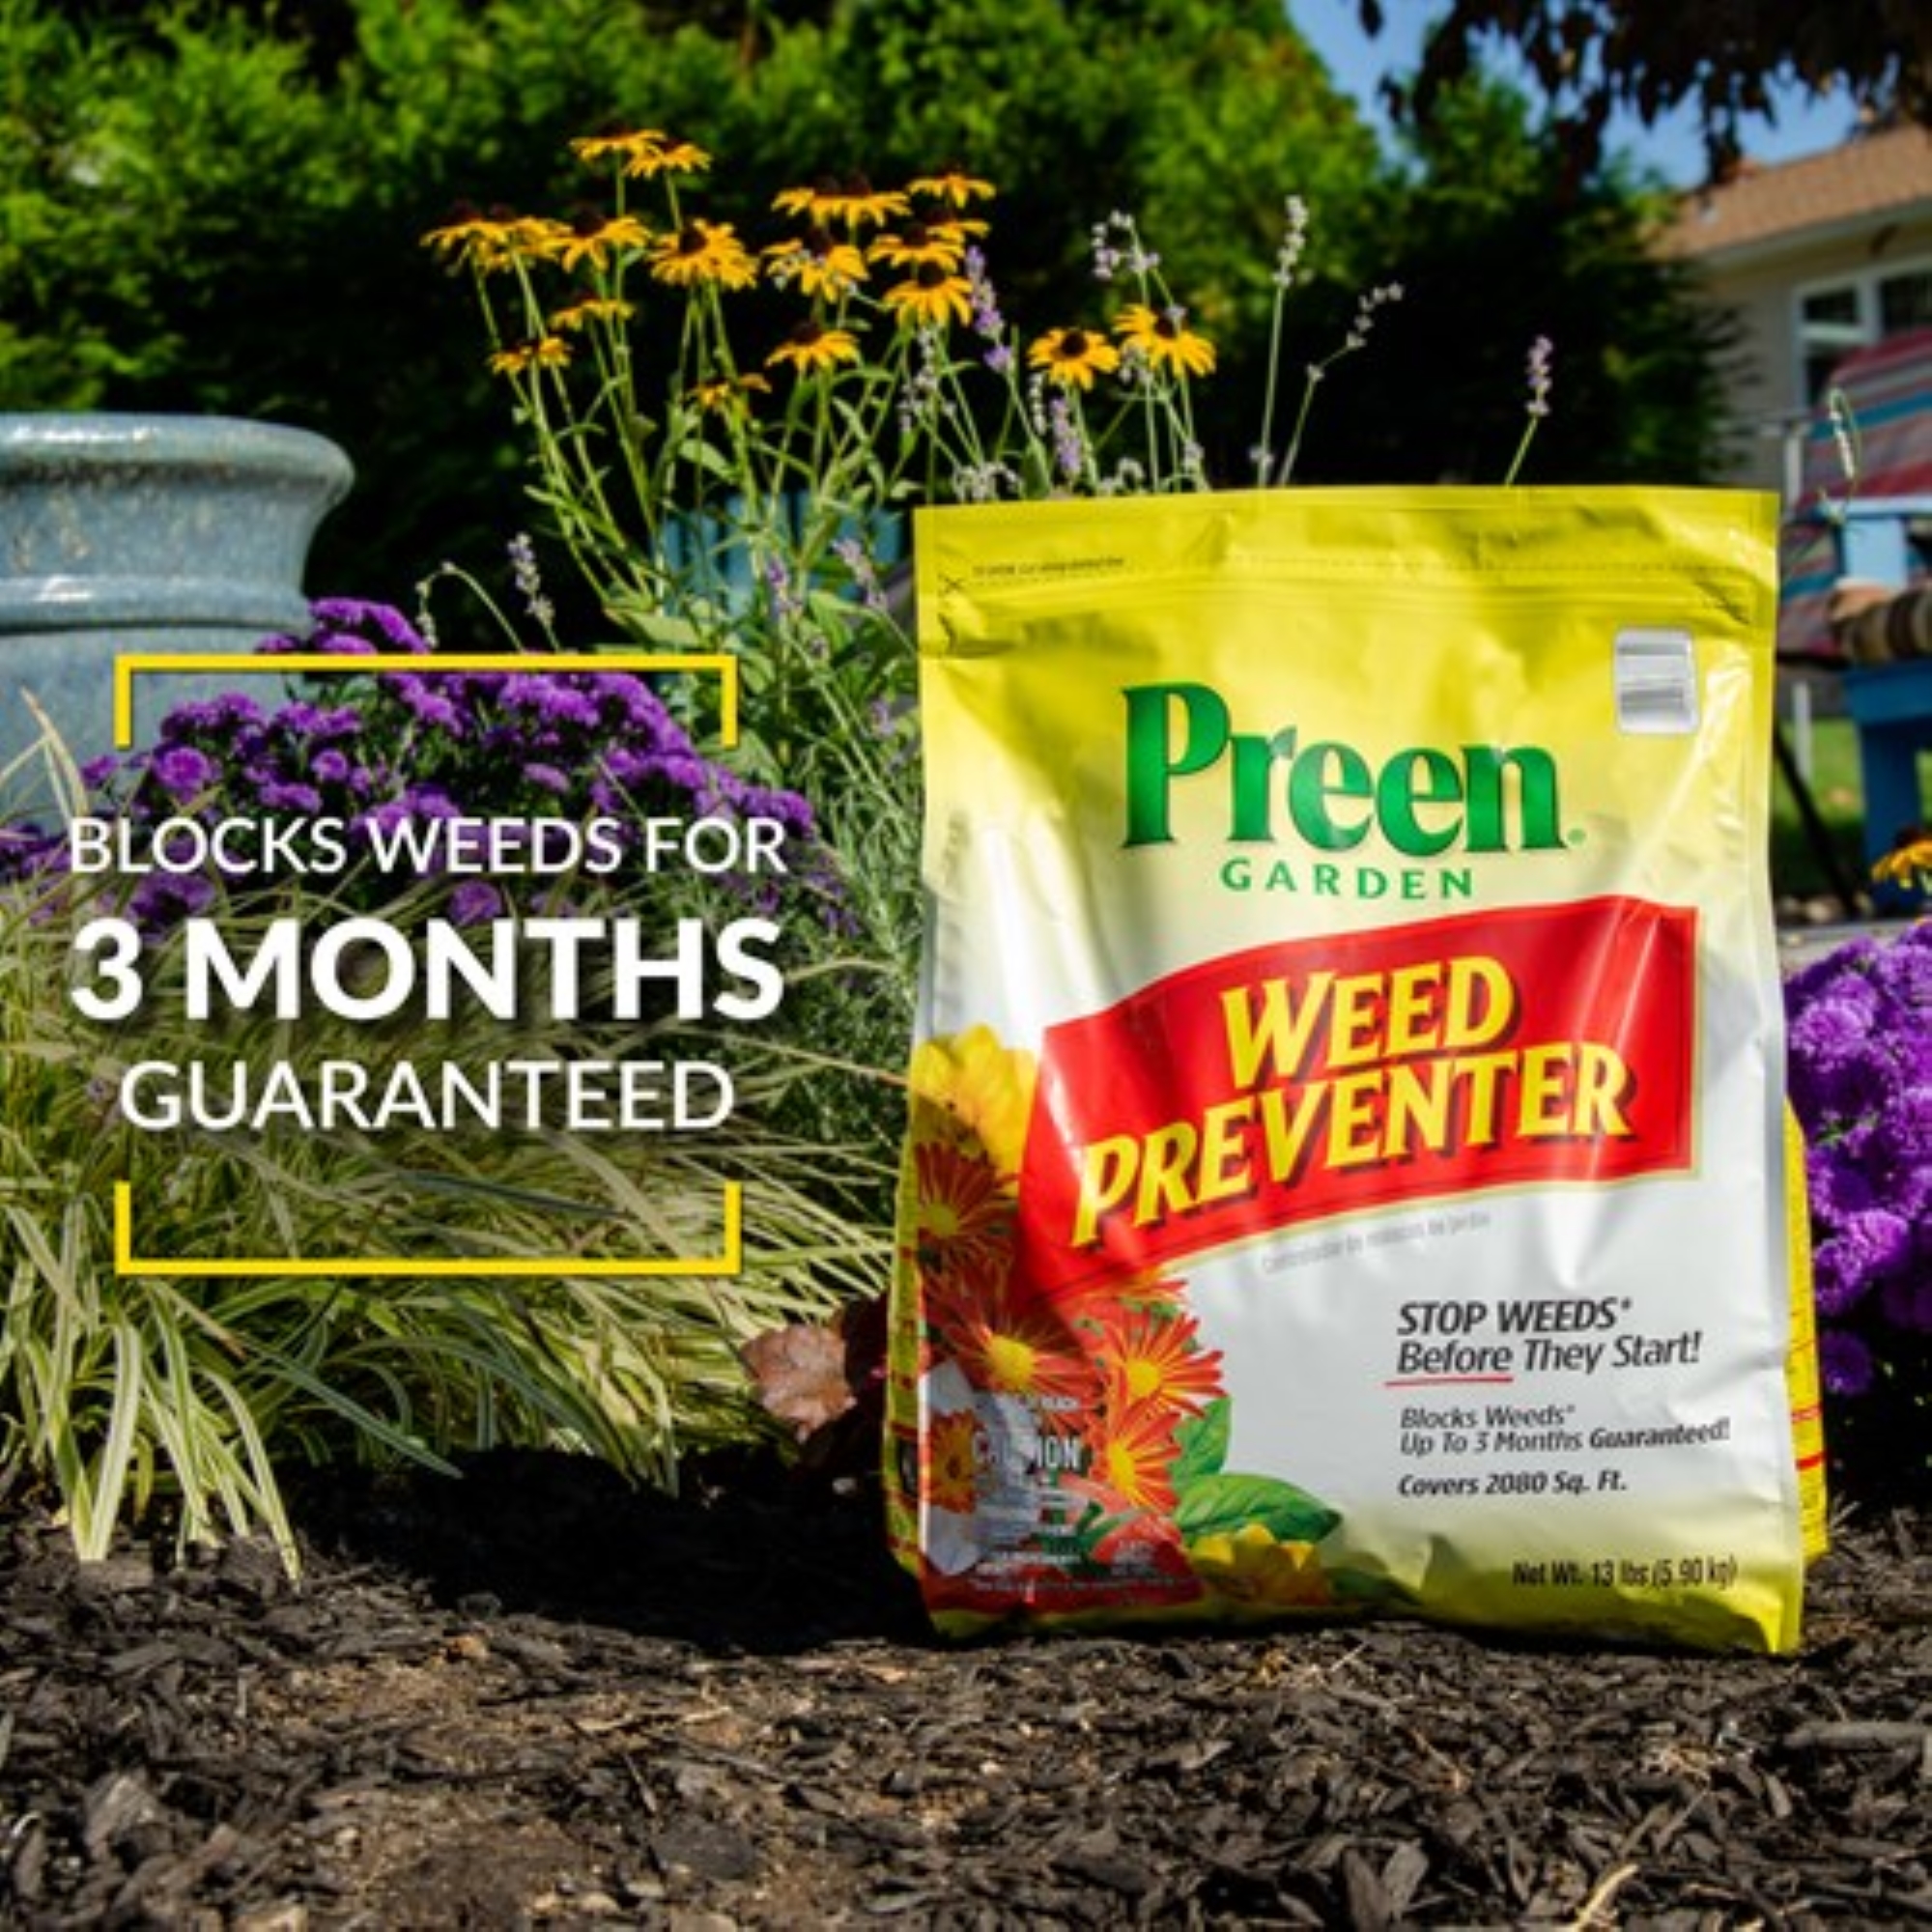 Preen Garden Weed Preventer - 13 lb. Bag - Covers 2,080 Sq. ft. - image 3 of 8